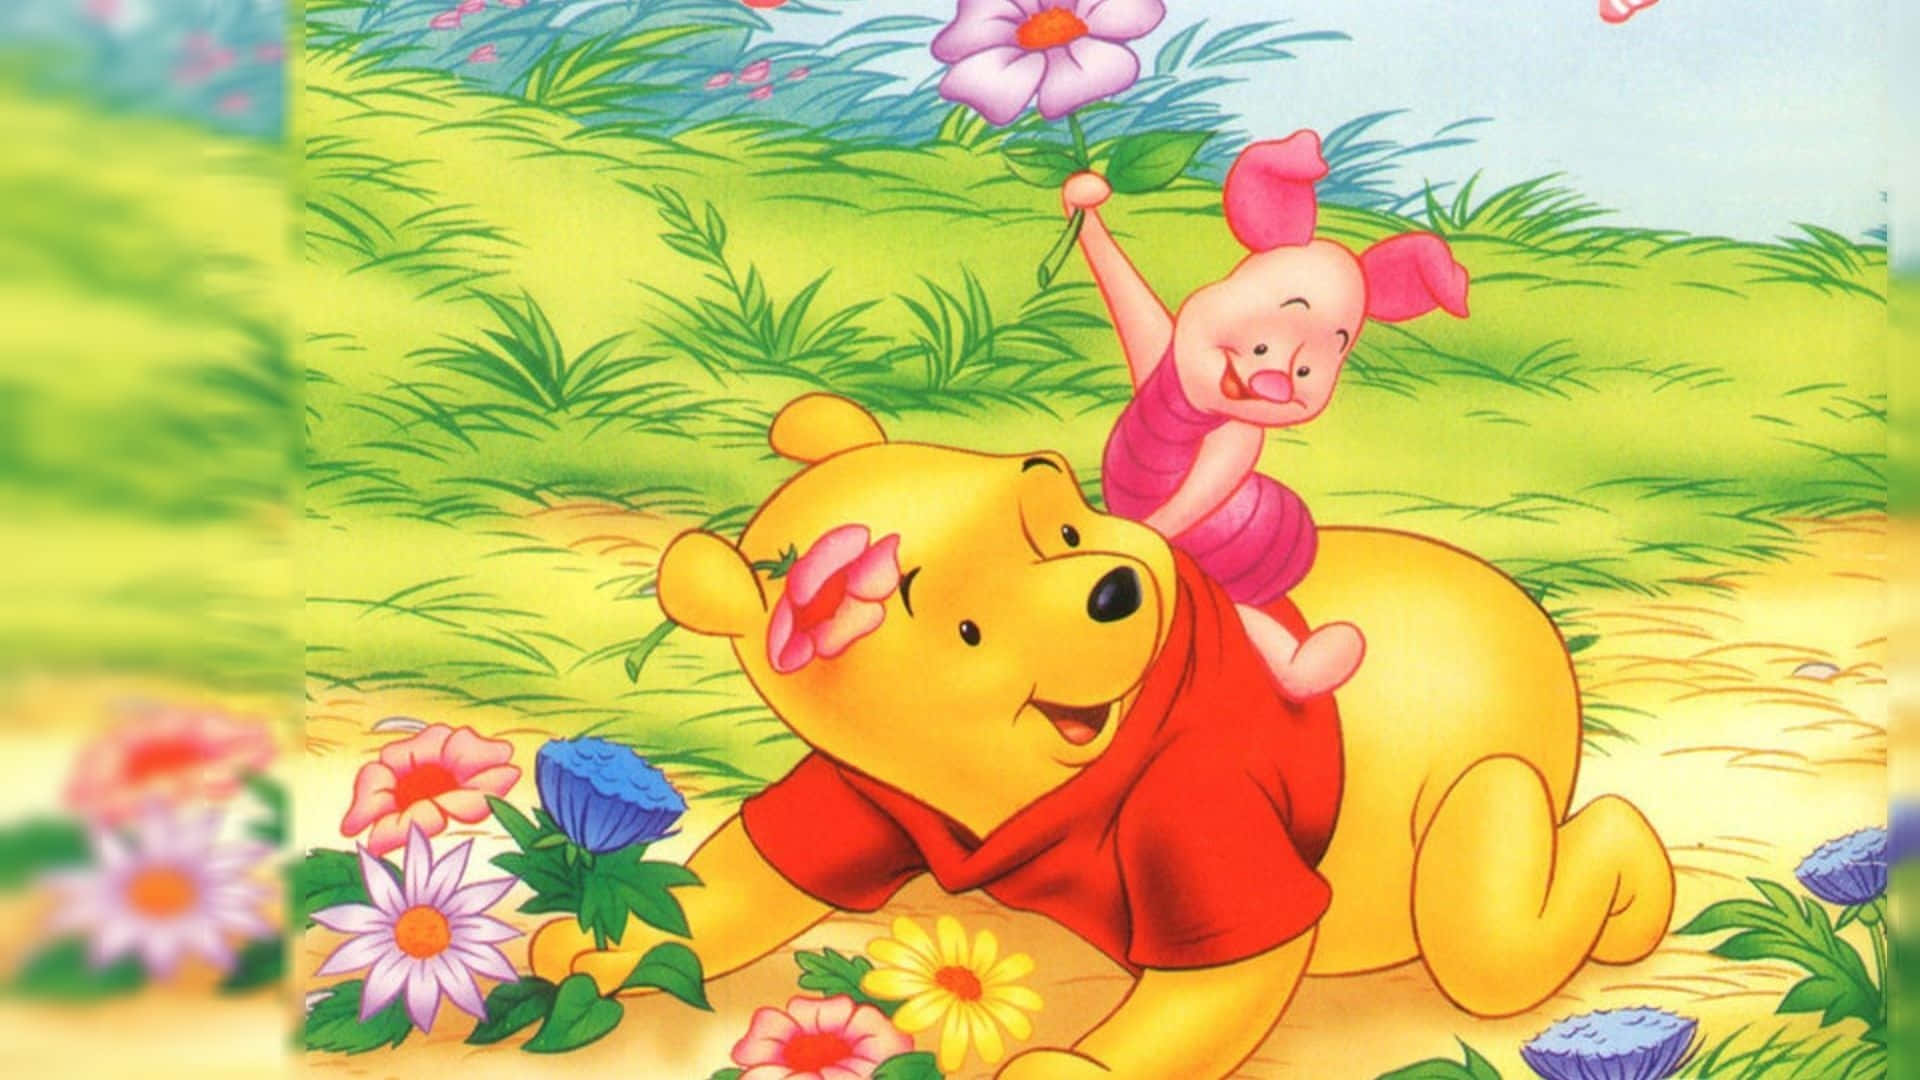 Capture the joy of childhood with Winnie the Pooh Wallpaper